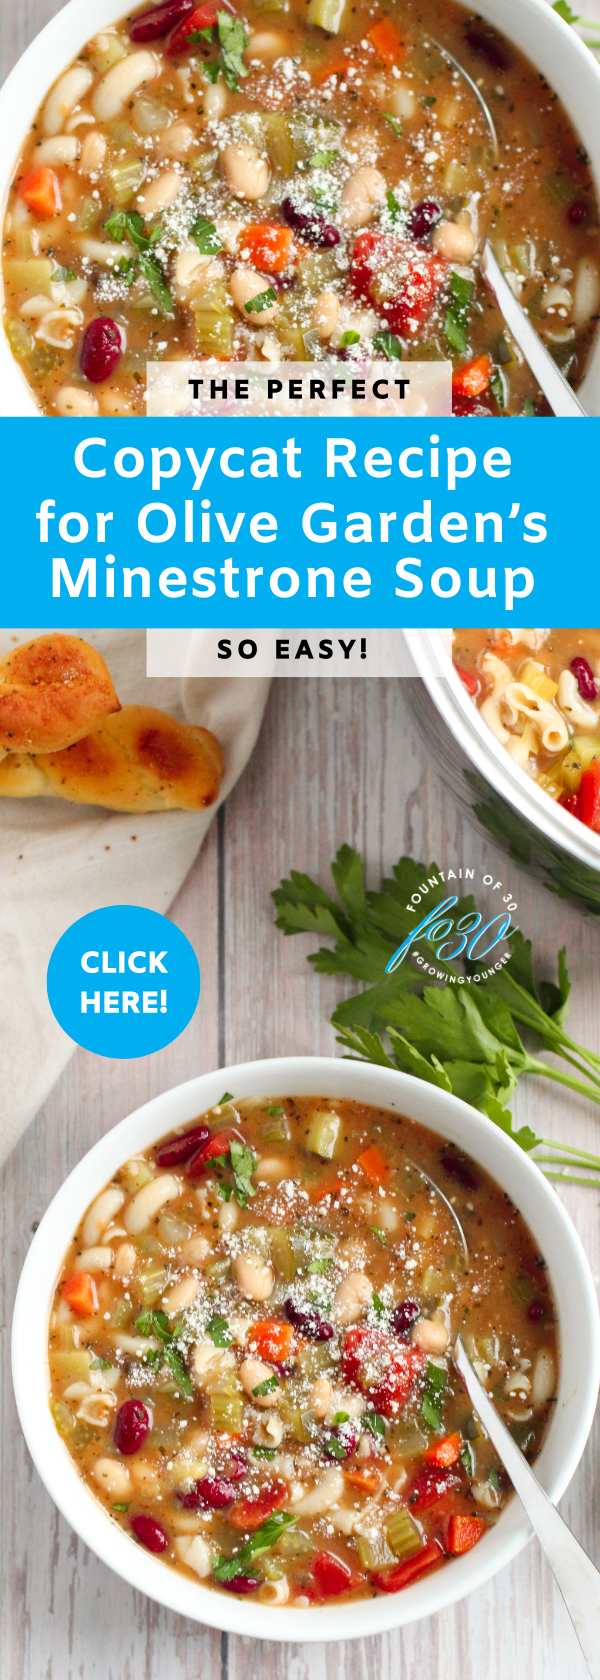 perfect copycat recipe for olive garden minestrone soup fountainof30